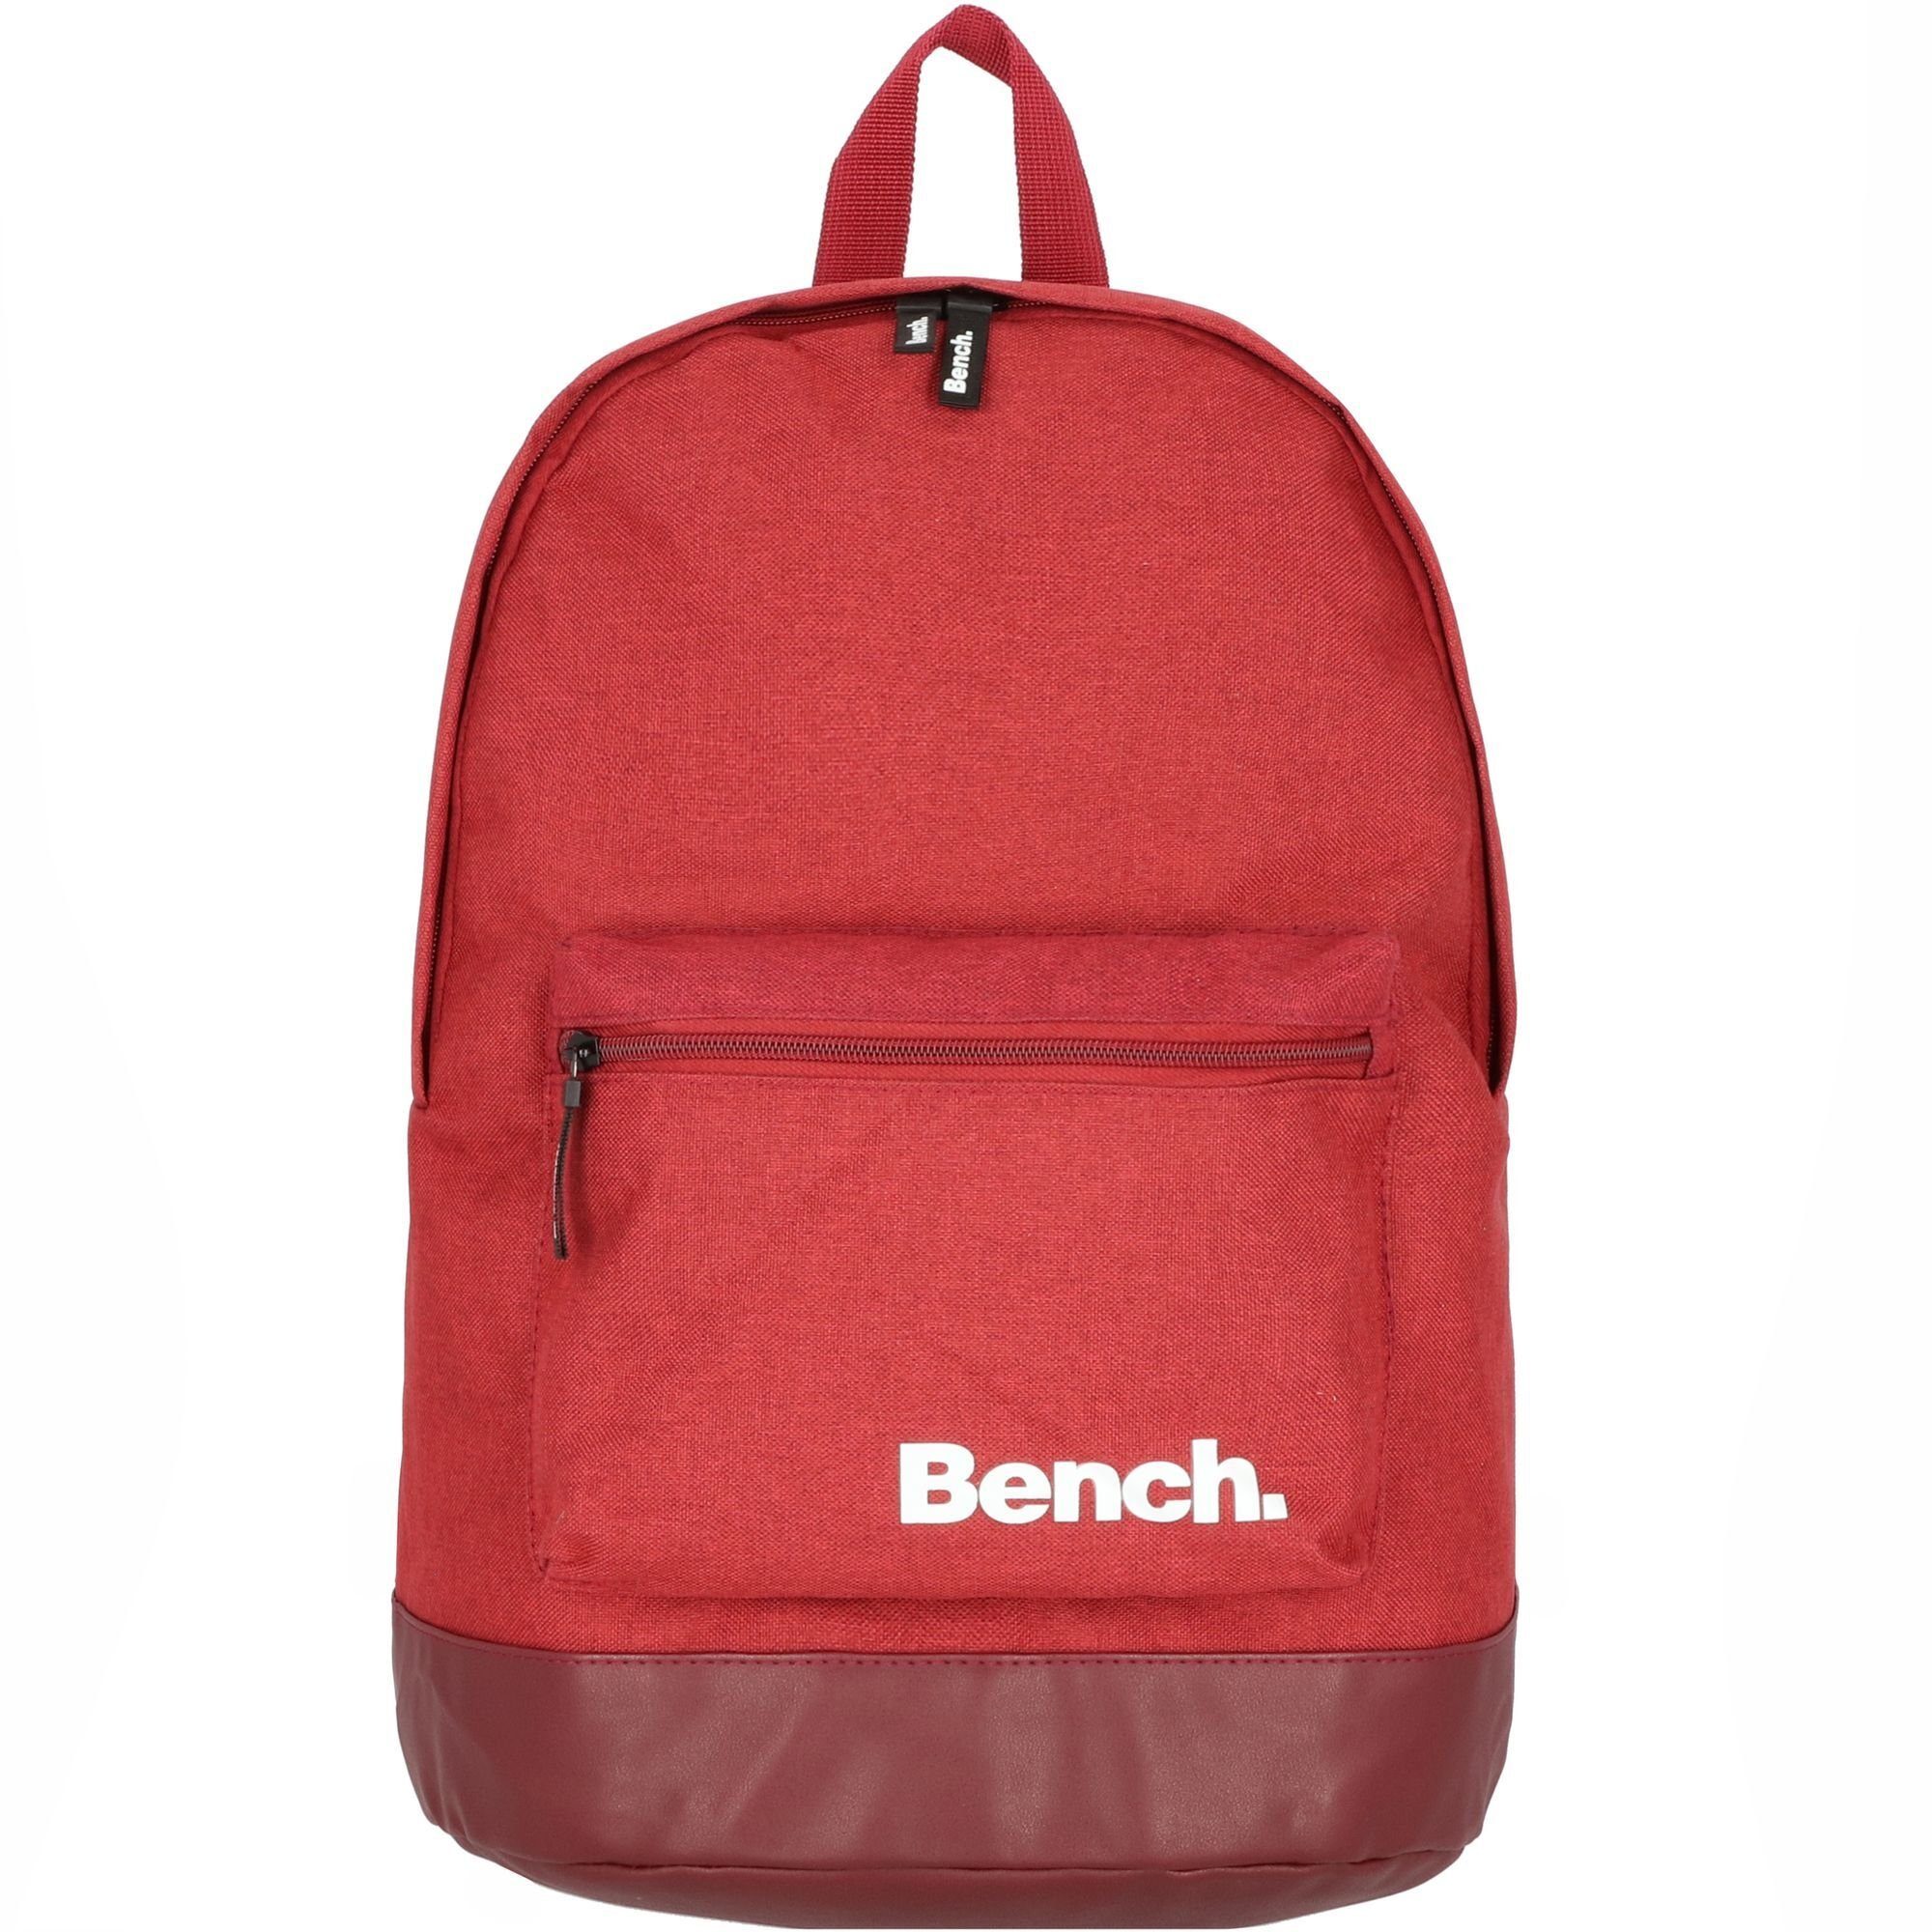 Bench. Daypack classic, Polyester